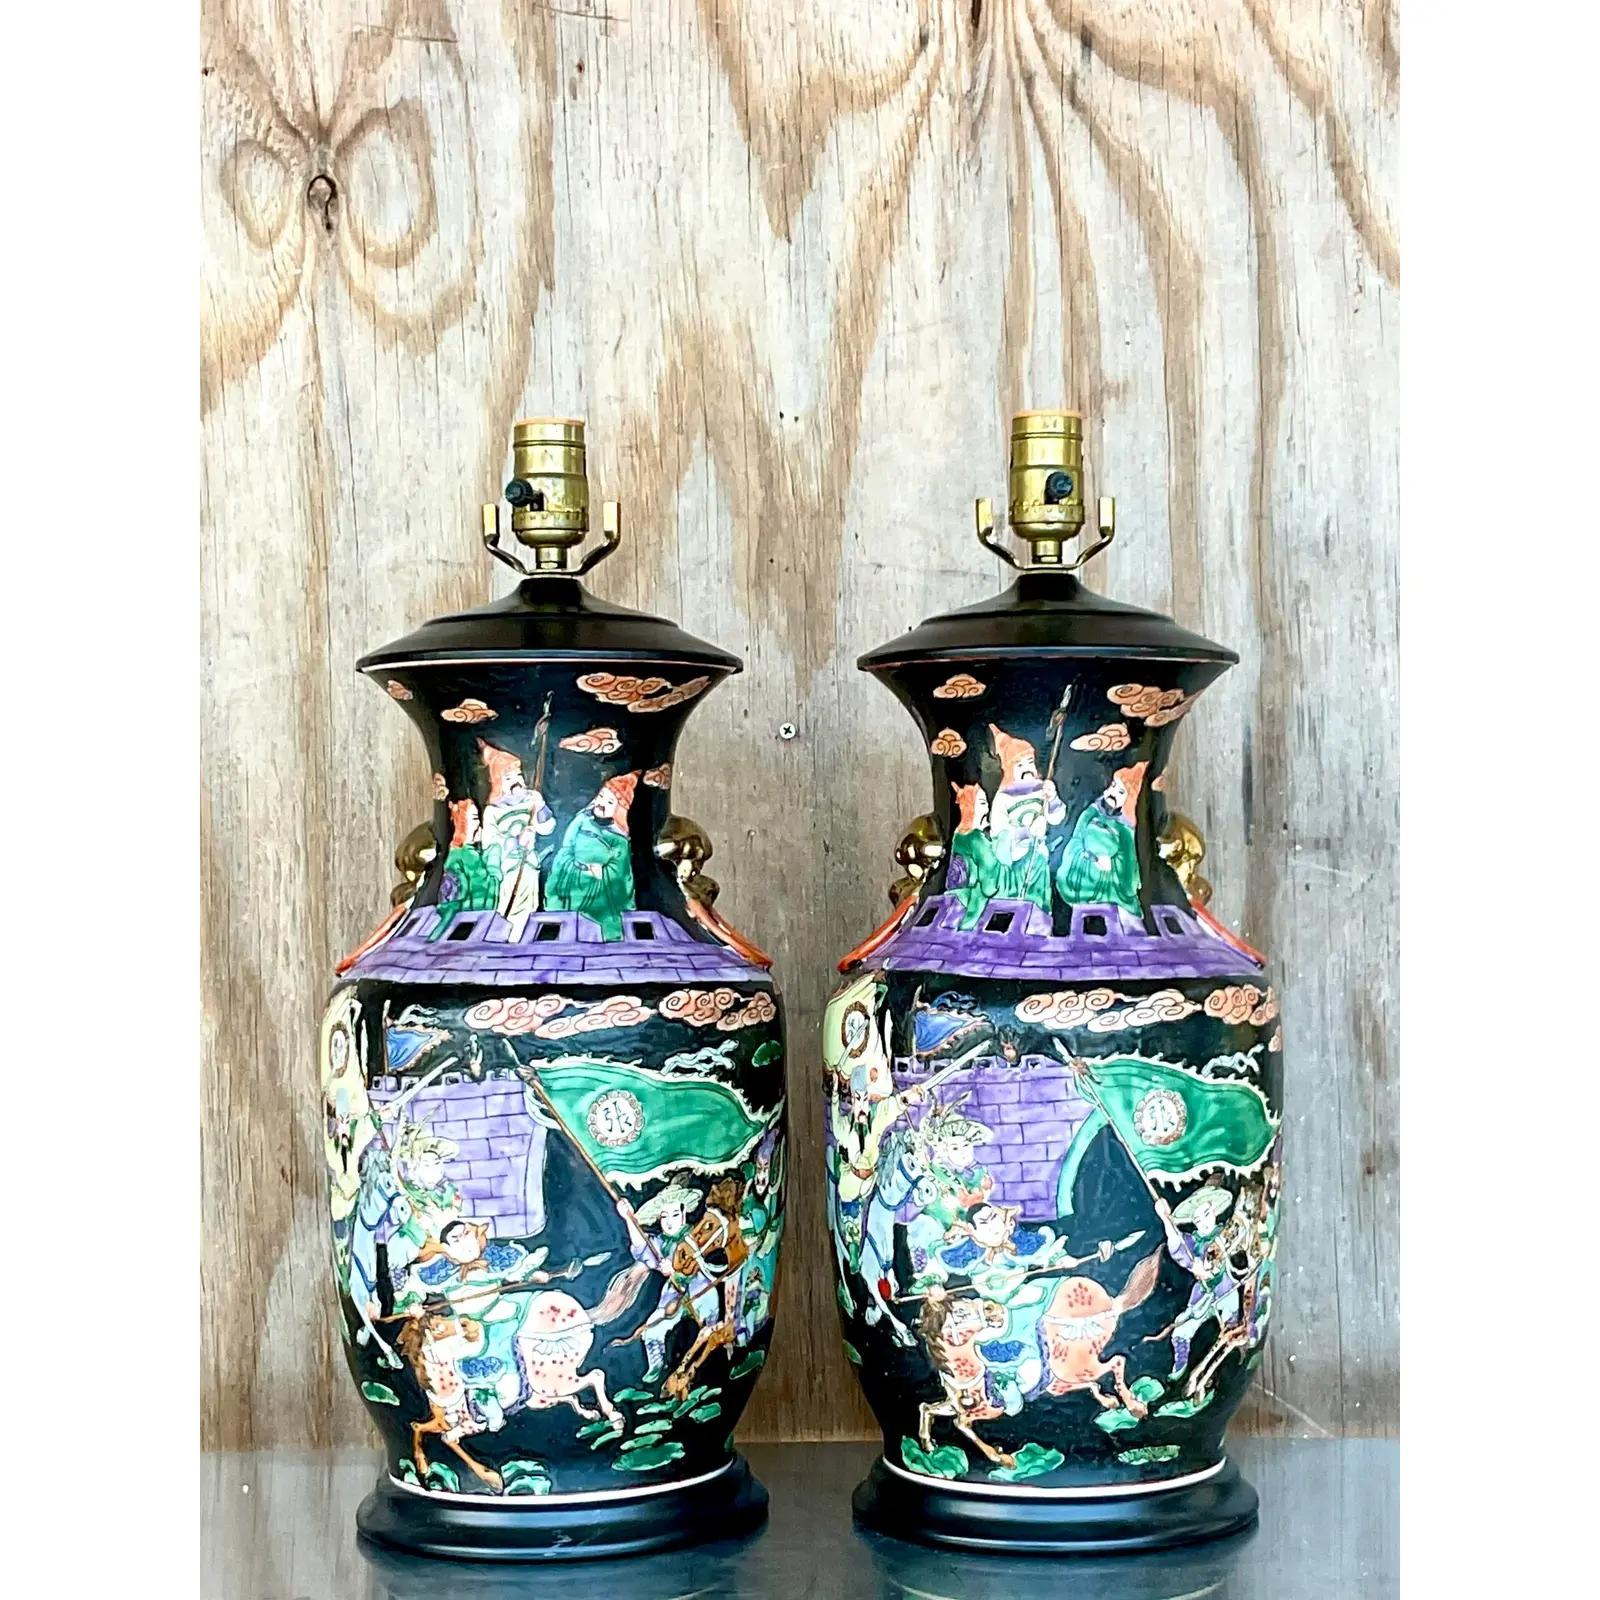 Vintage Asian Jewel Tone Chinoiserie Ceramic Lamps - a Pair For Sale 1